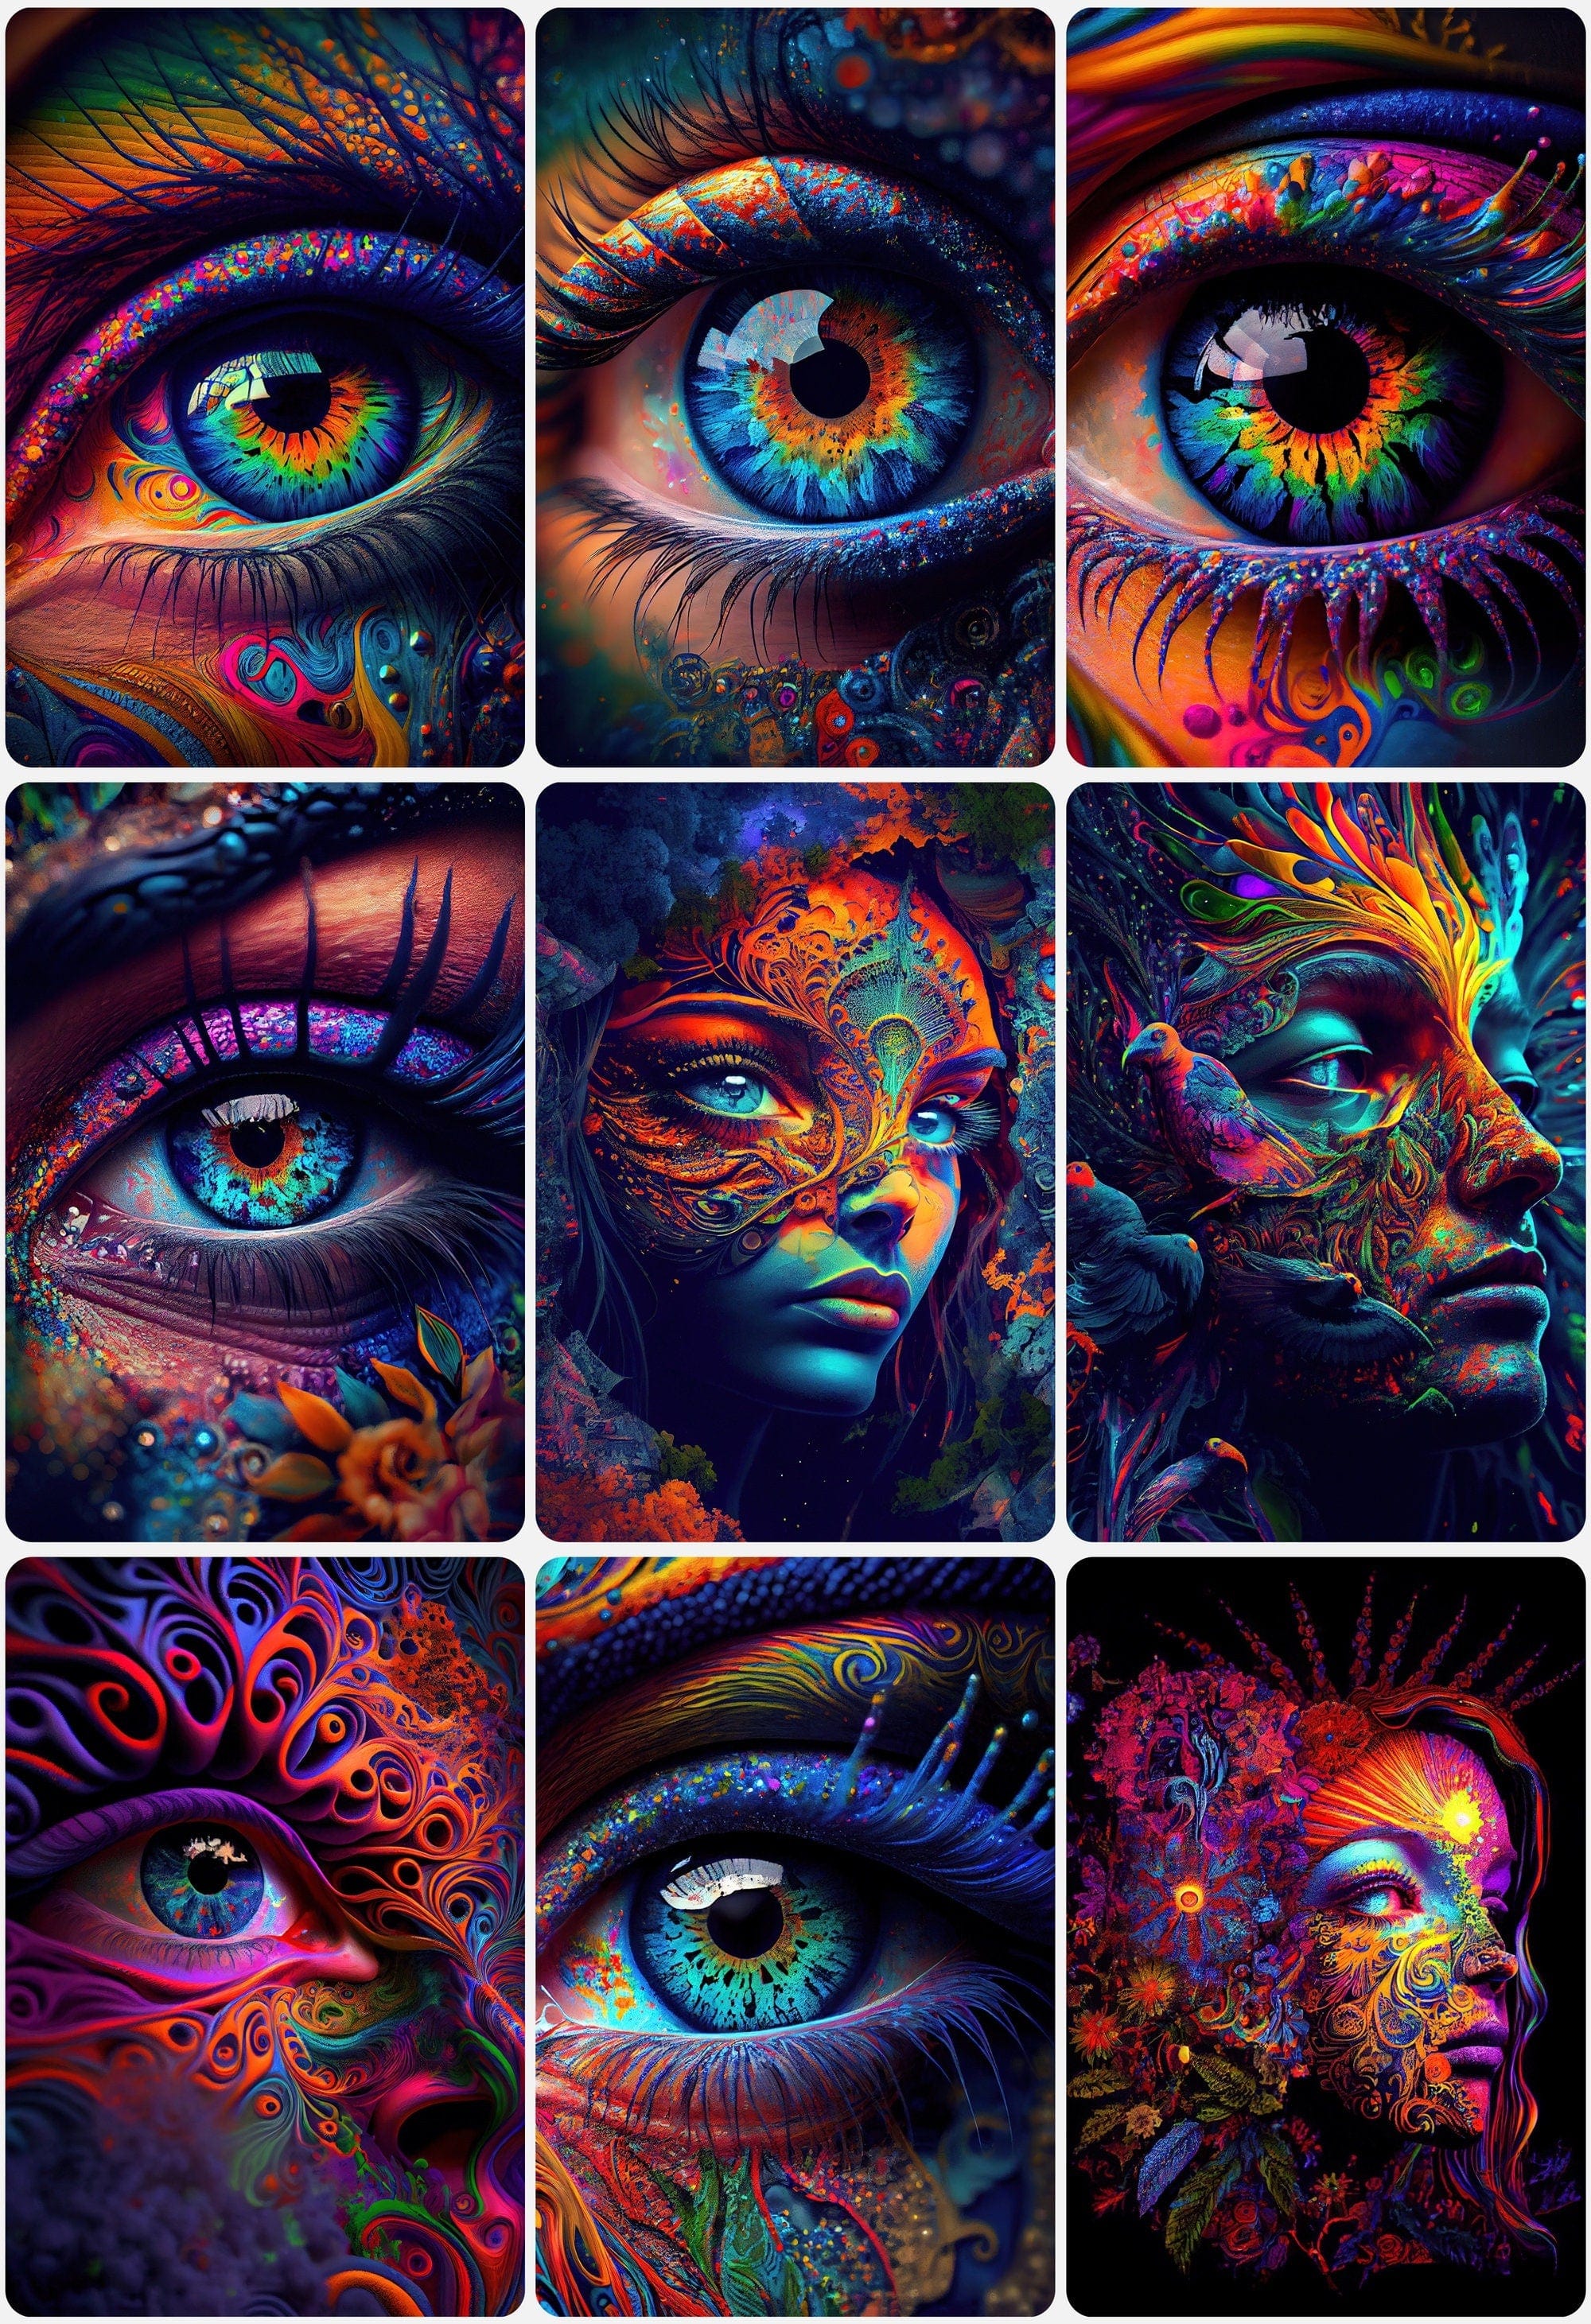 Psychedelic Eyes - Unleash Your Creativity and Add a Pop of Color to Your Artworks - Printable Psychedelic Eye Images. Wall art Digital Download Sumobundle